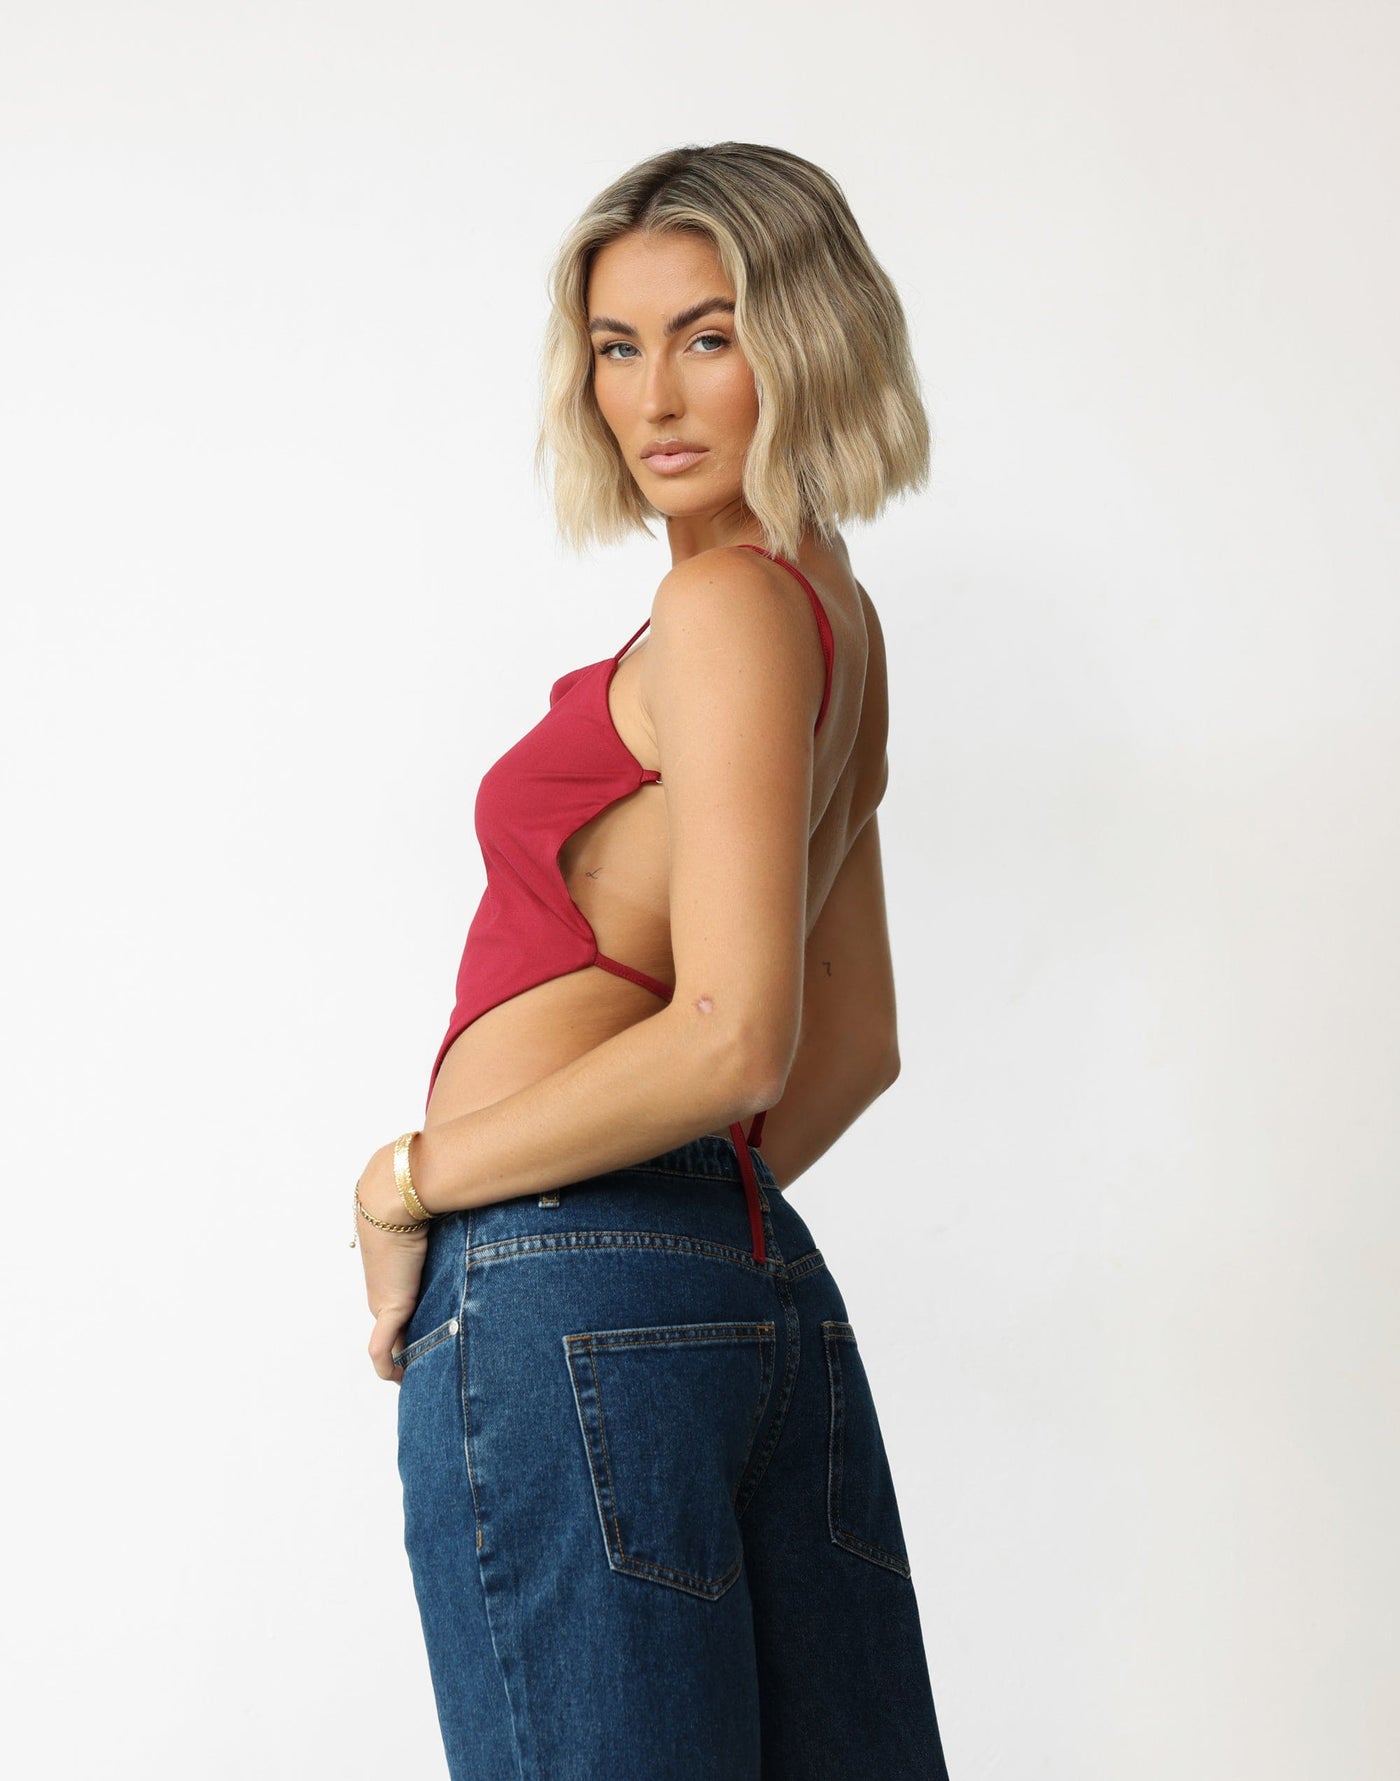 Amalia Top (Cherry) | CHARCOAL Exclusive - Straight Neckline V Point Hem Backless Top - Women's Top - Charcoal Clothing